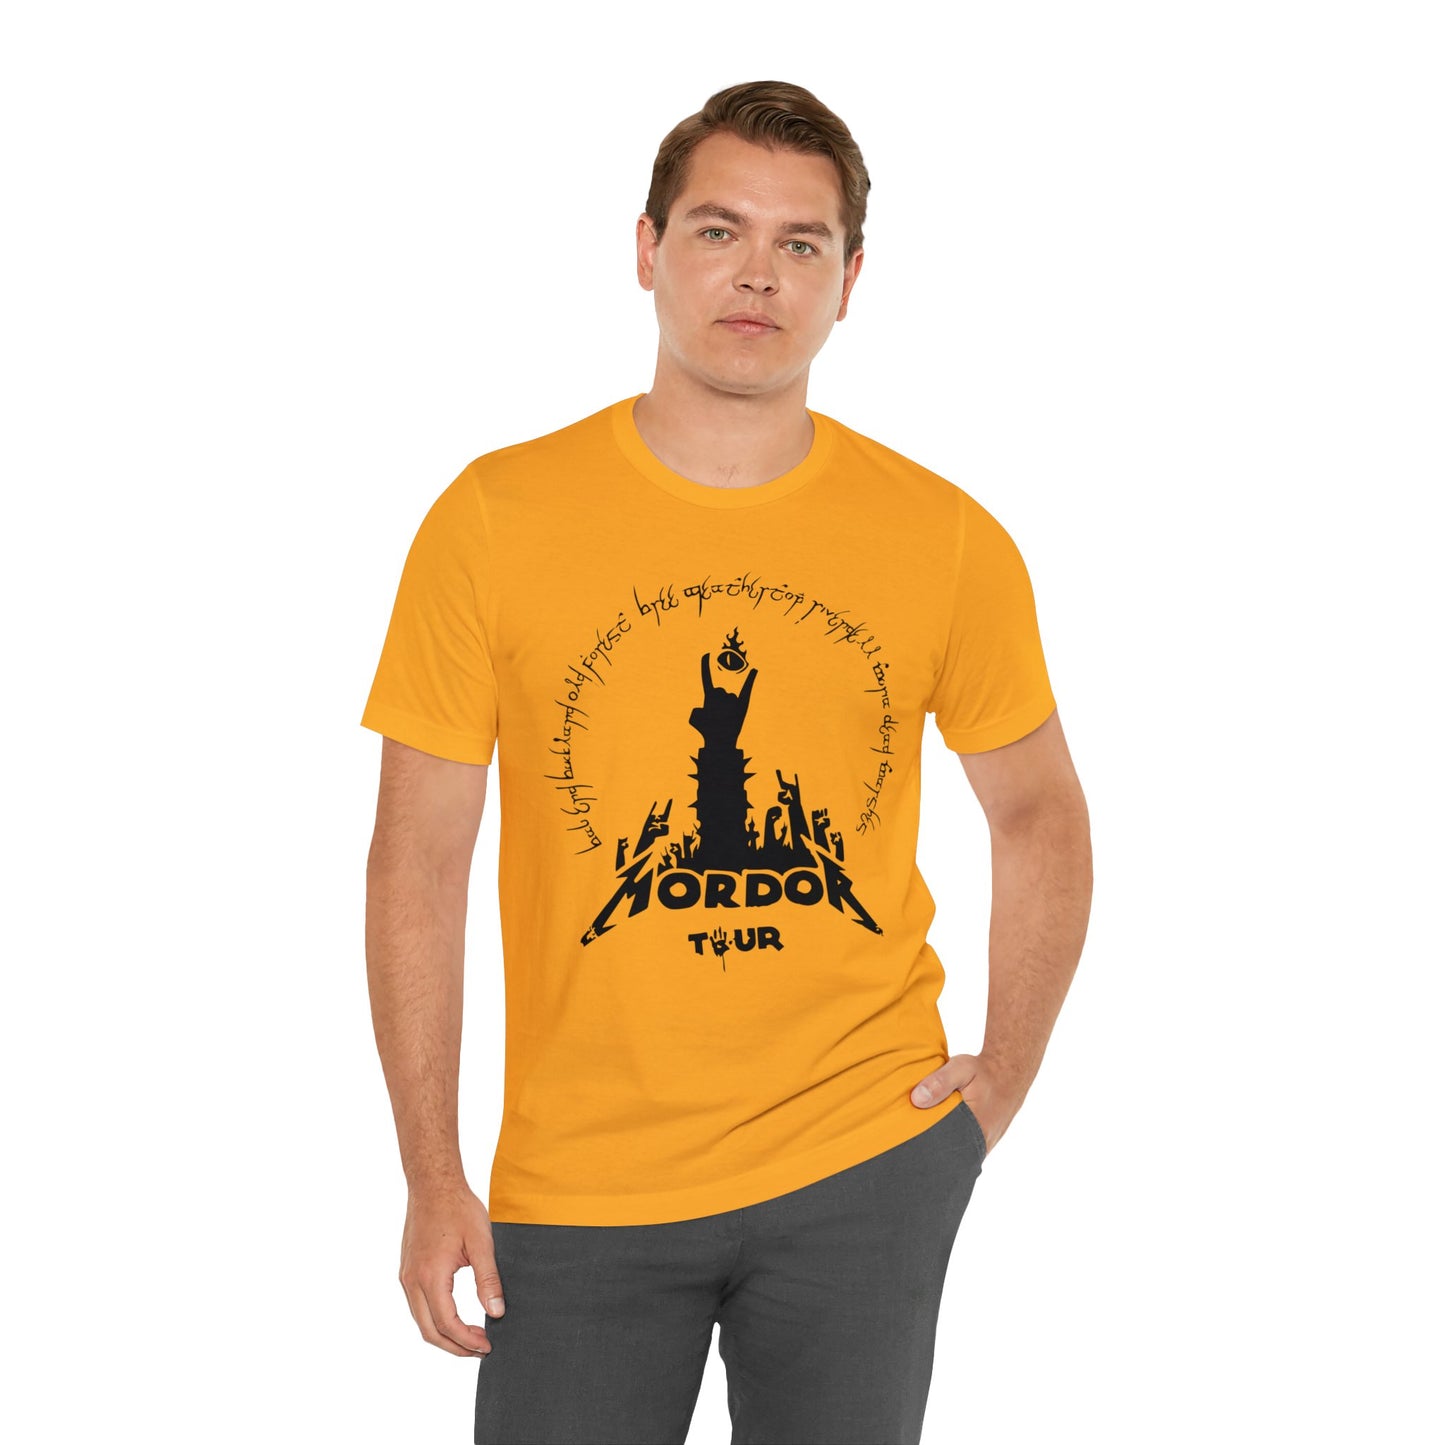 Mordor Tour Unisex Concert Tee - Lord of the Rings